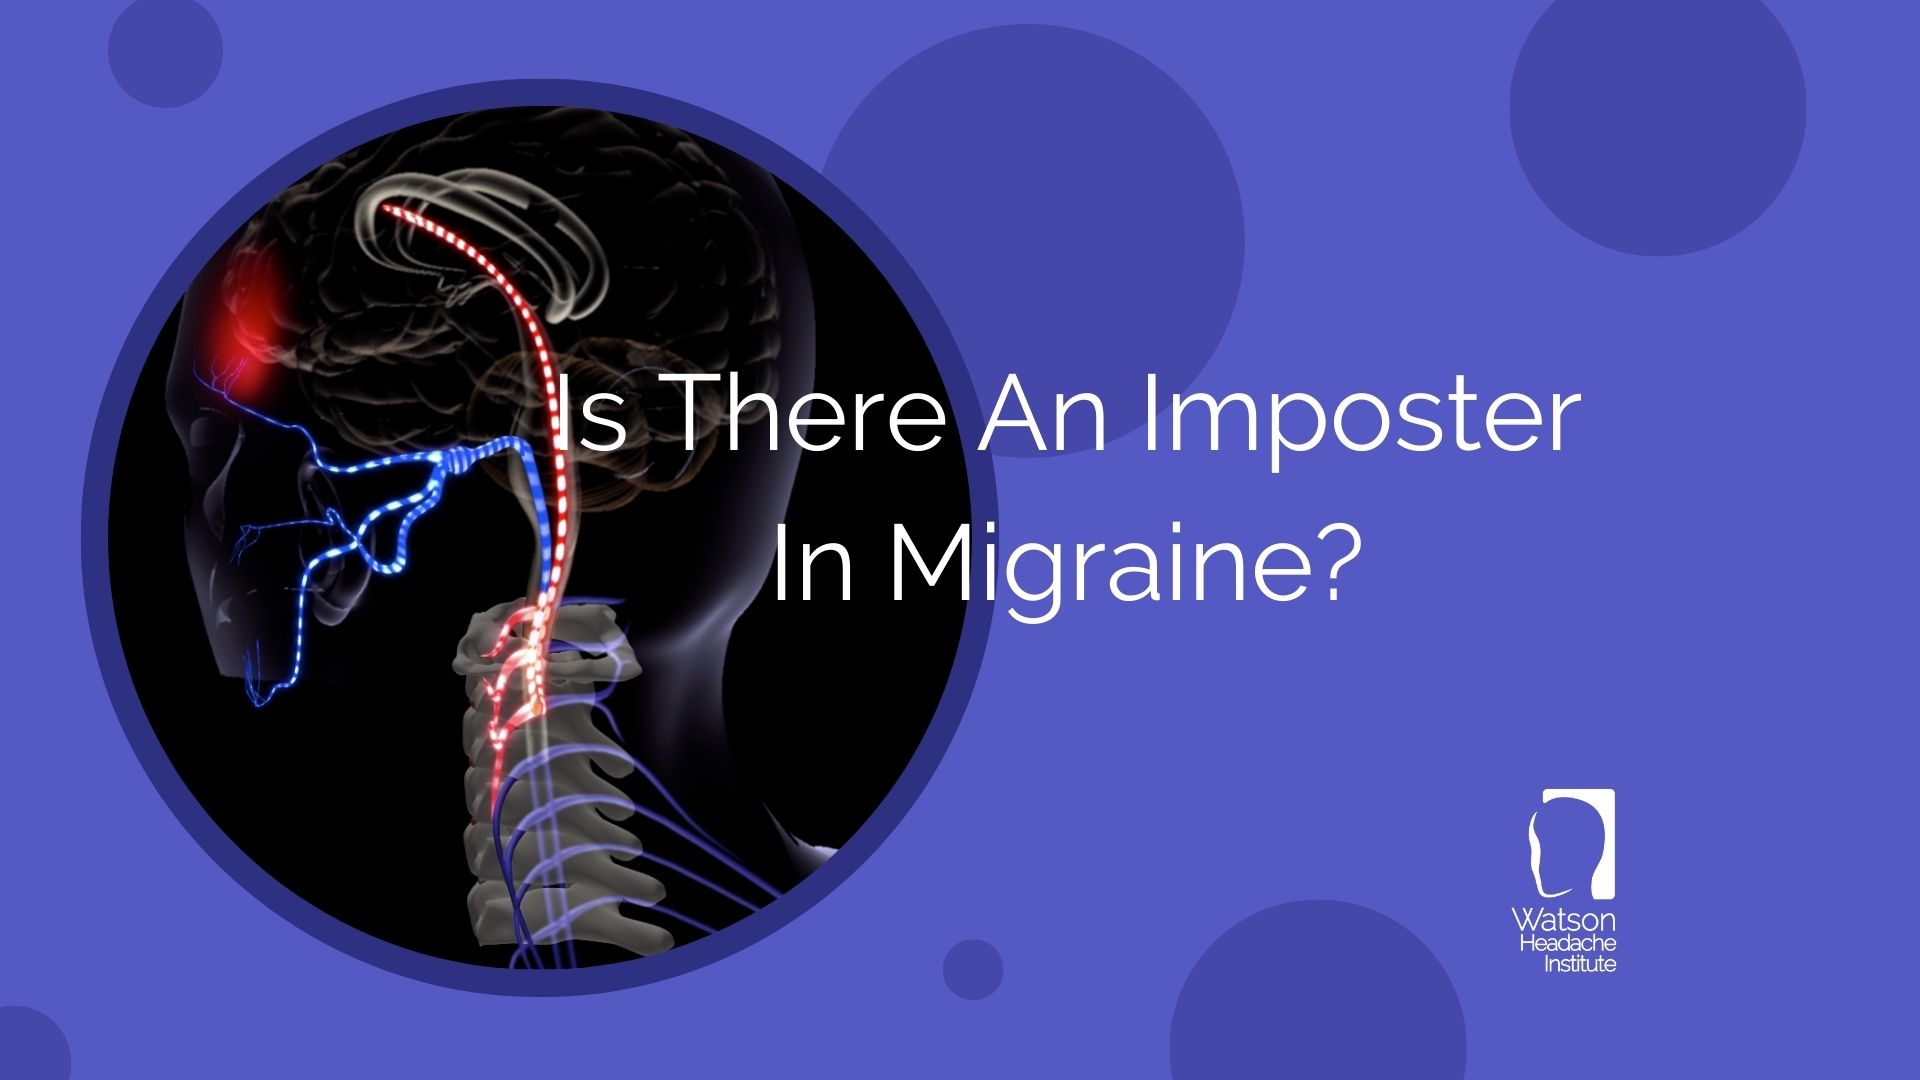 Commentary - Is There An Imposter In Migraine